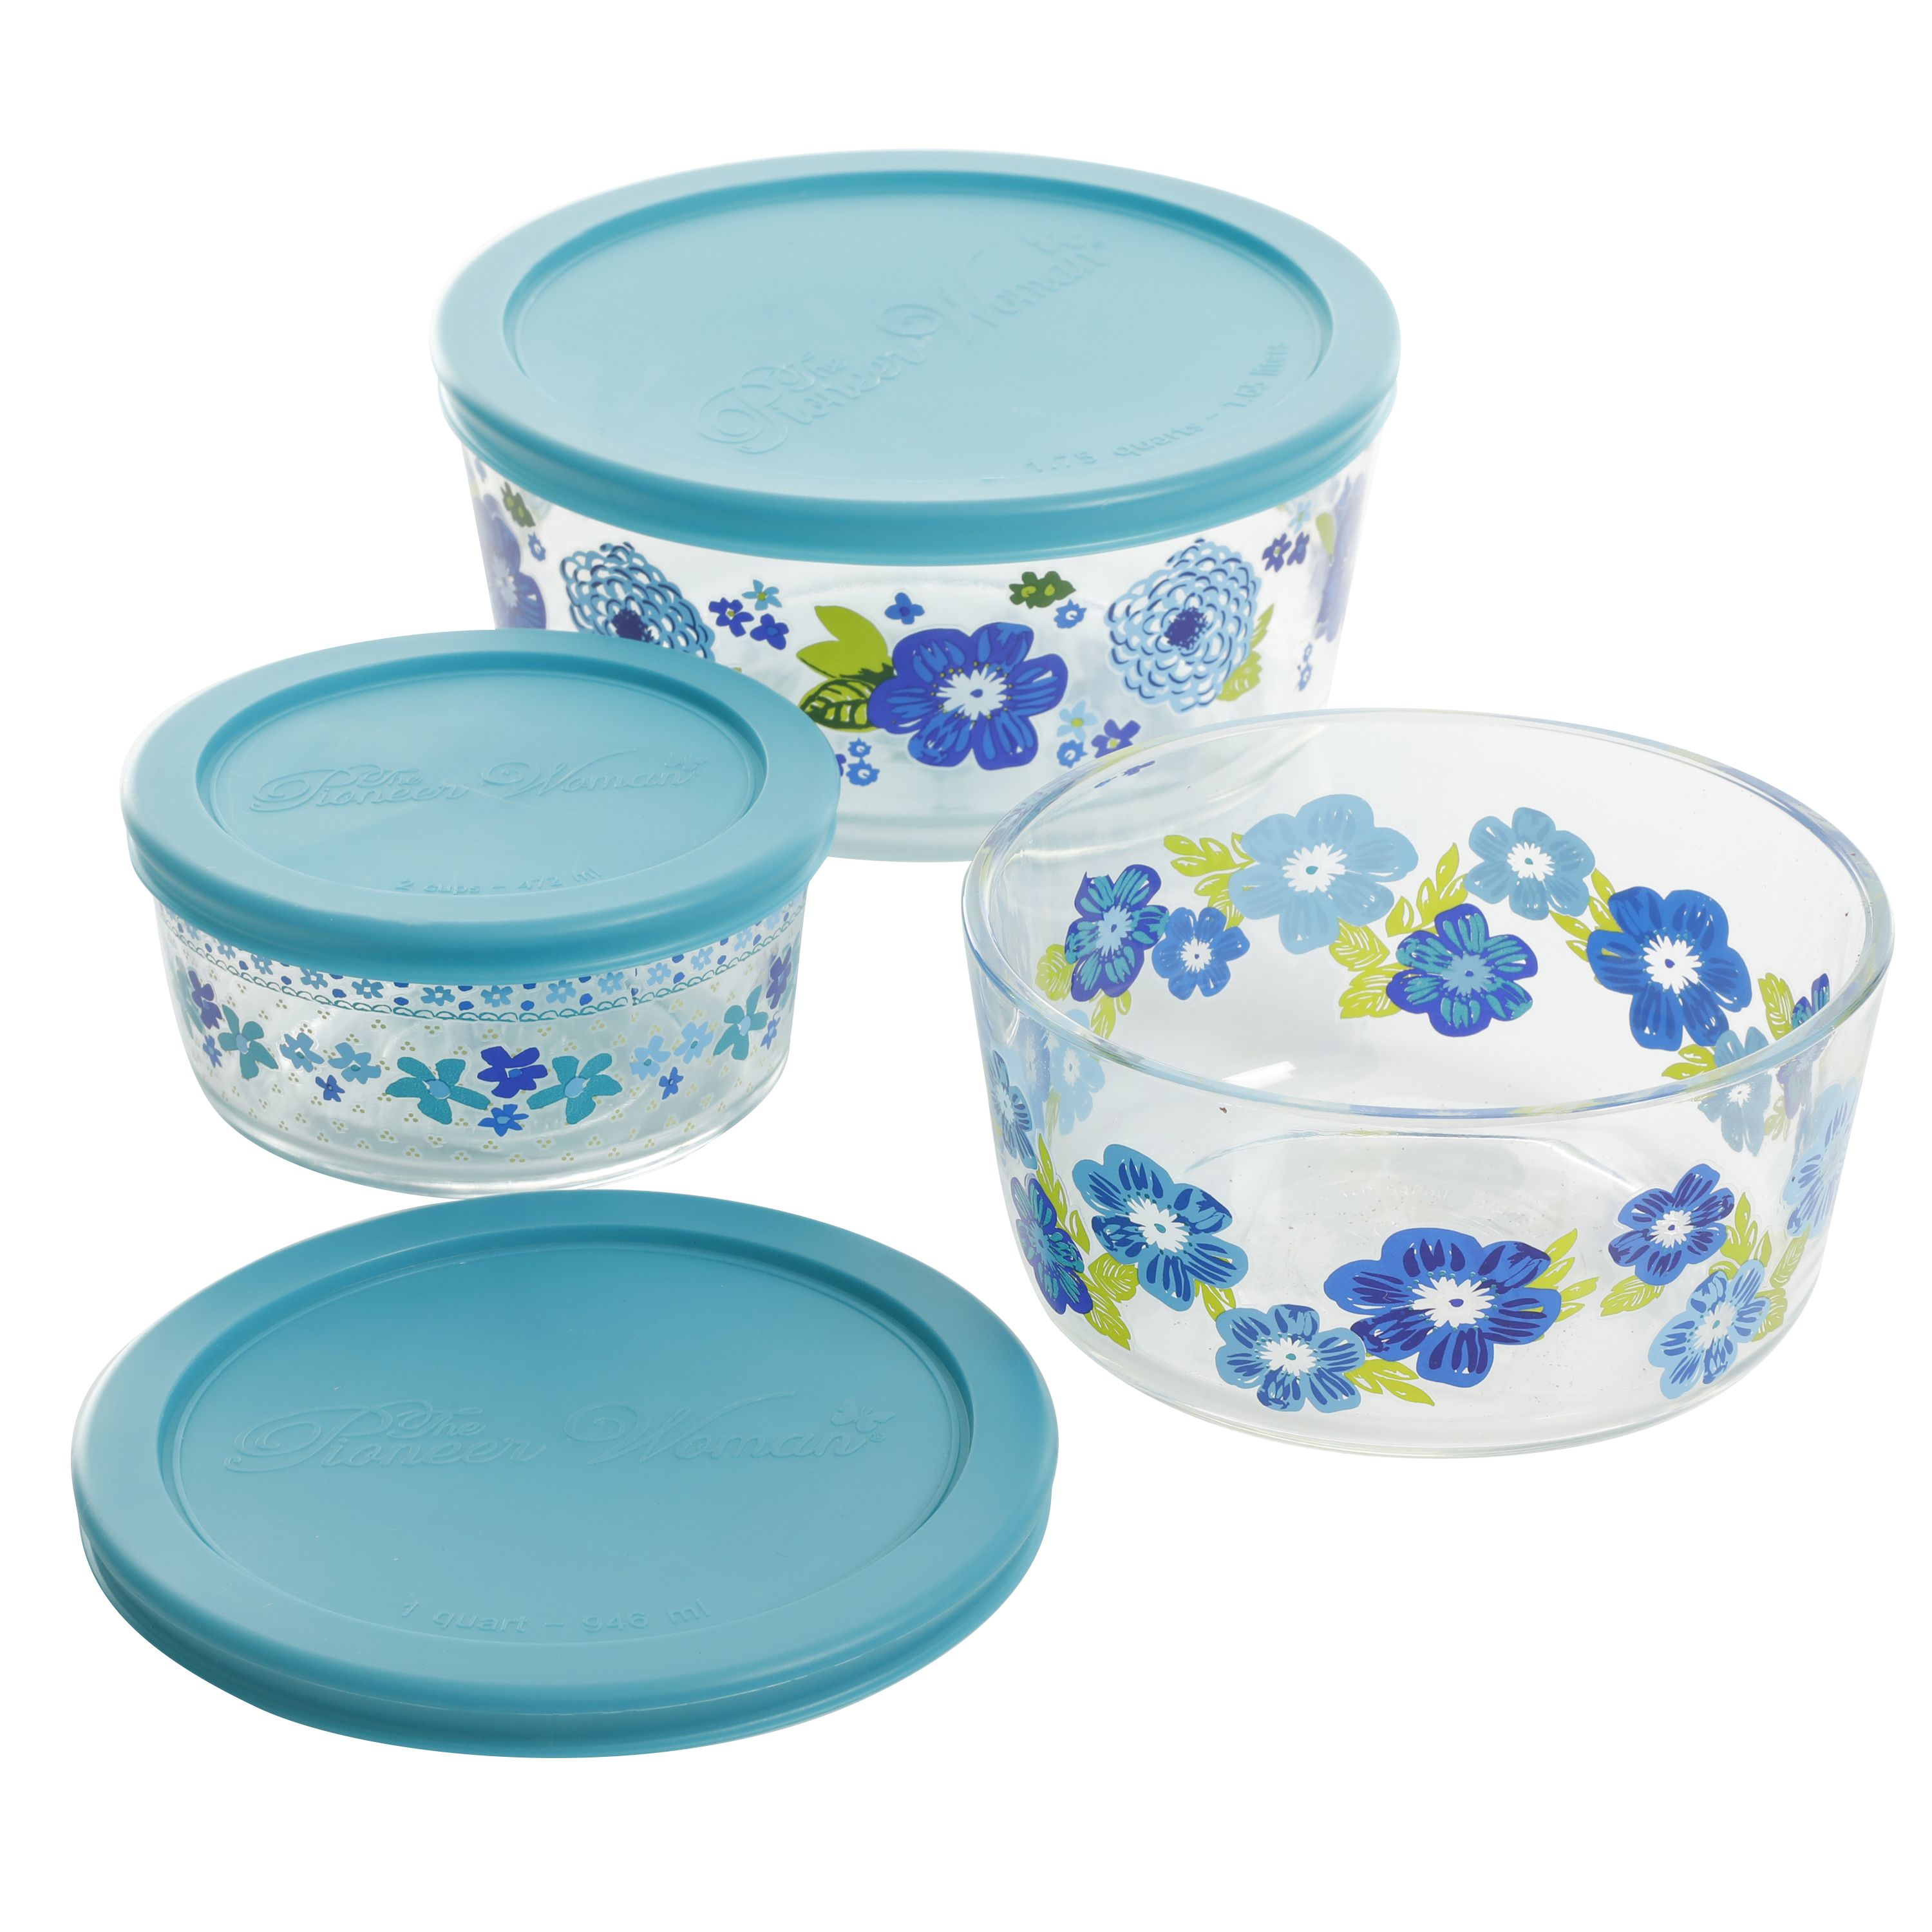 The Pioneer Woman 6-Piece Storage Containers